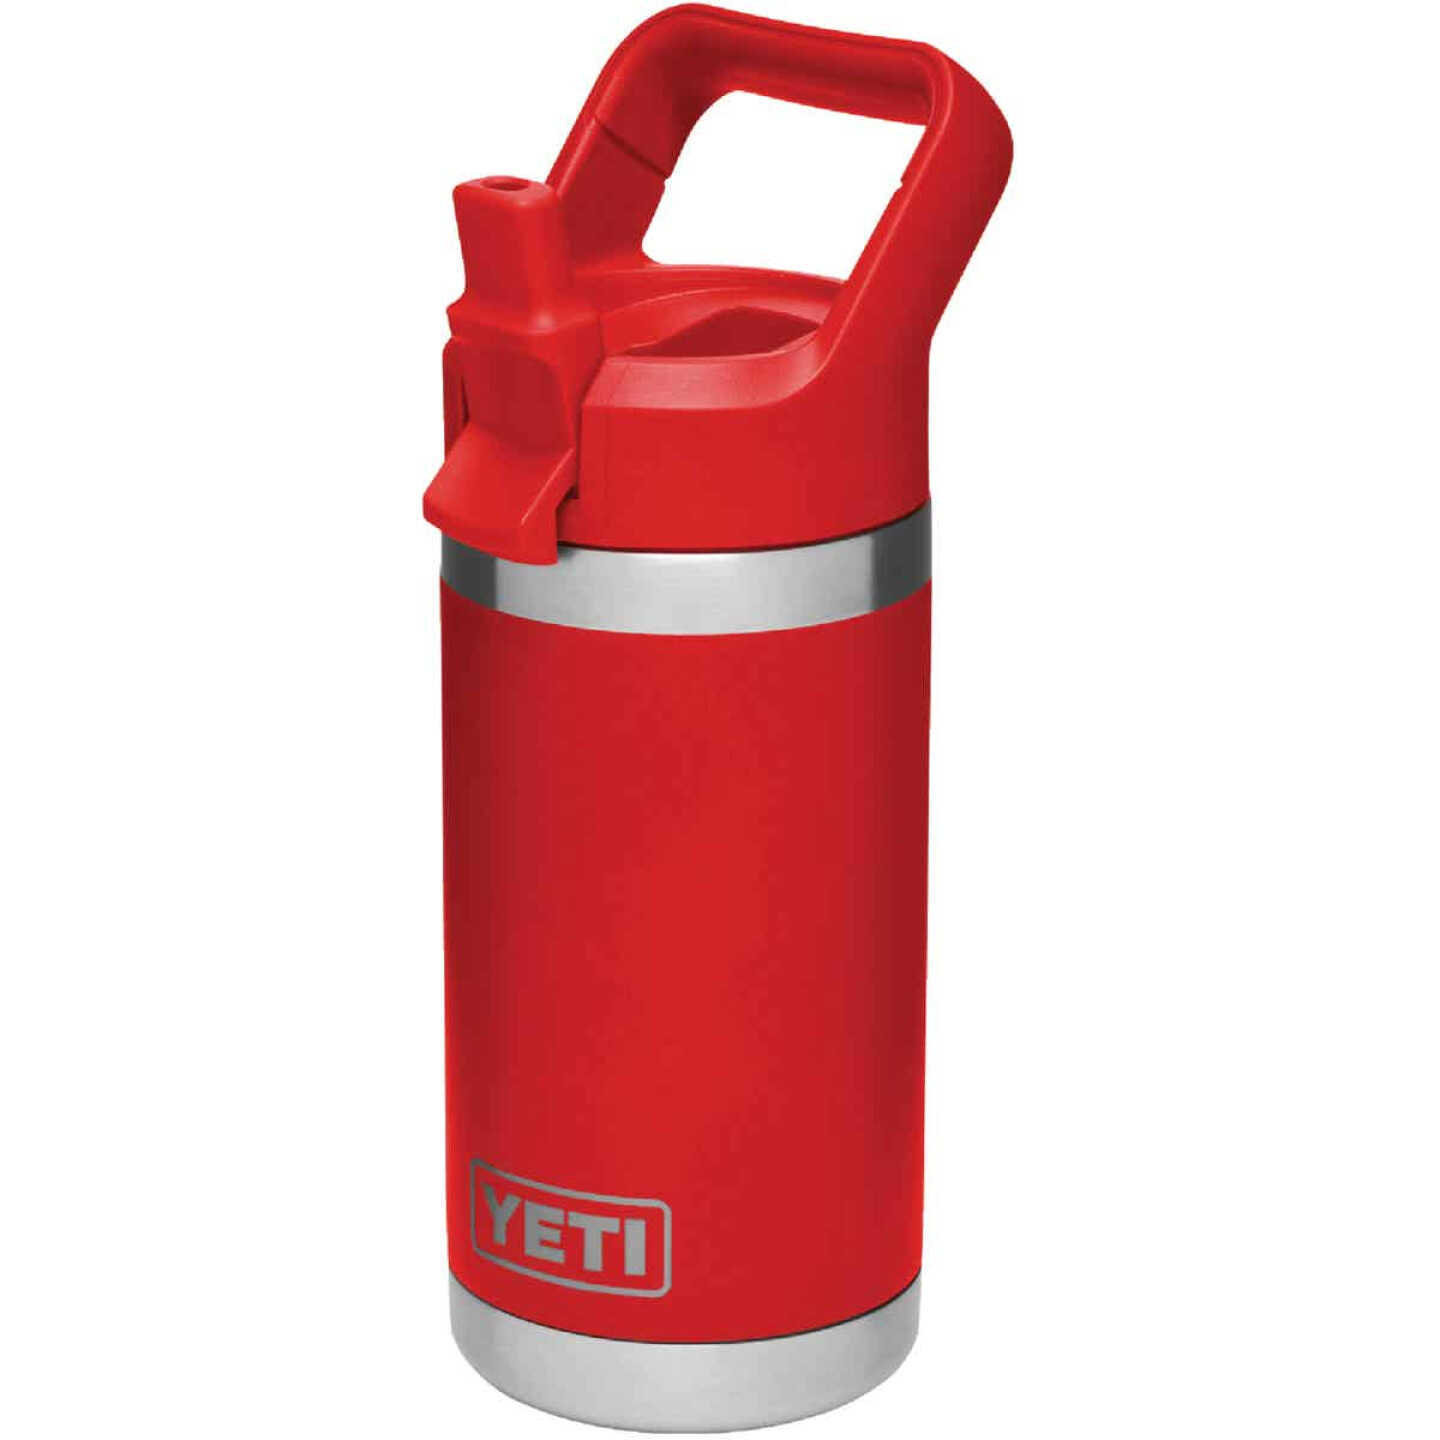 Yeti Rambler Jr 12 Oz. Canyon Red Stainless Steel Insulated